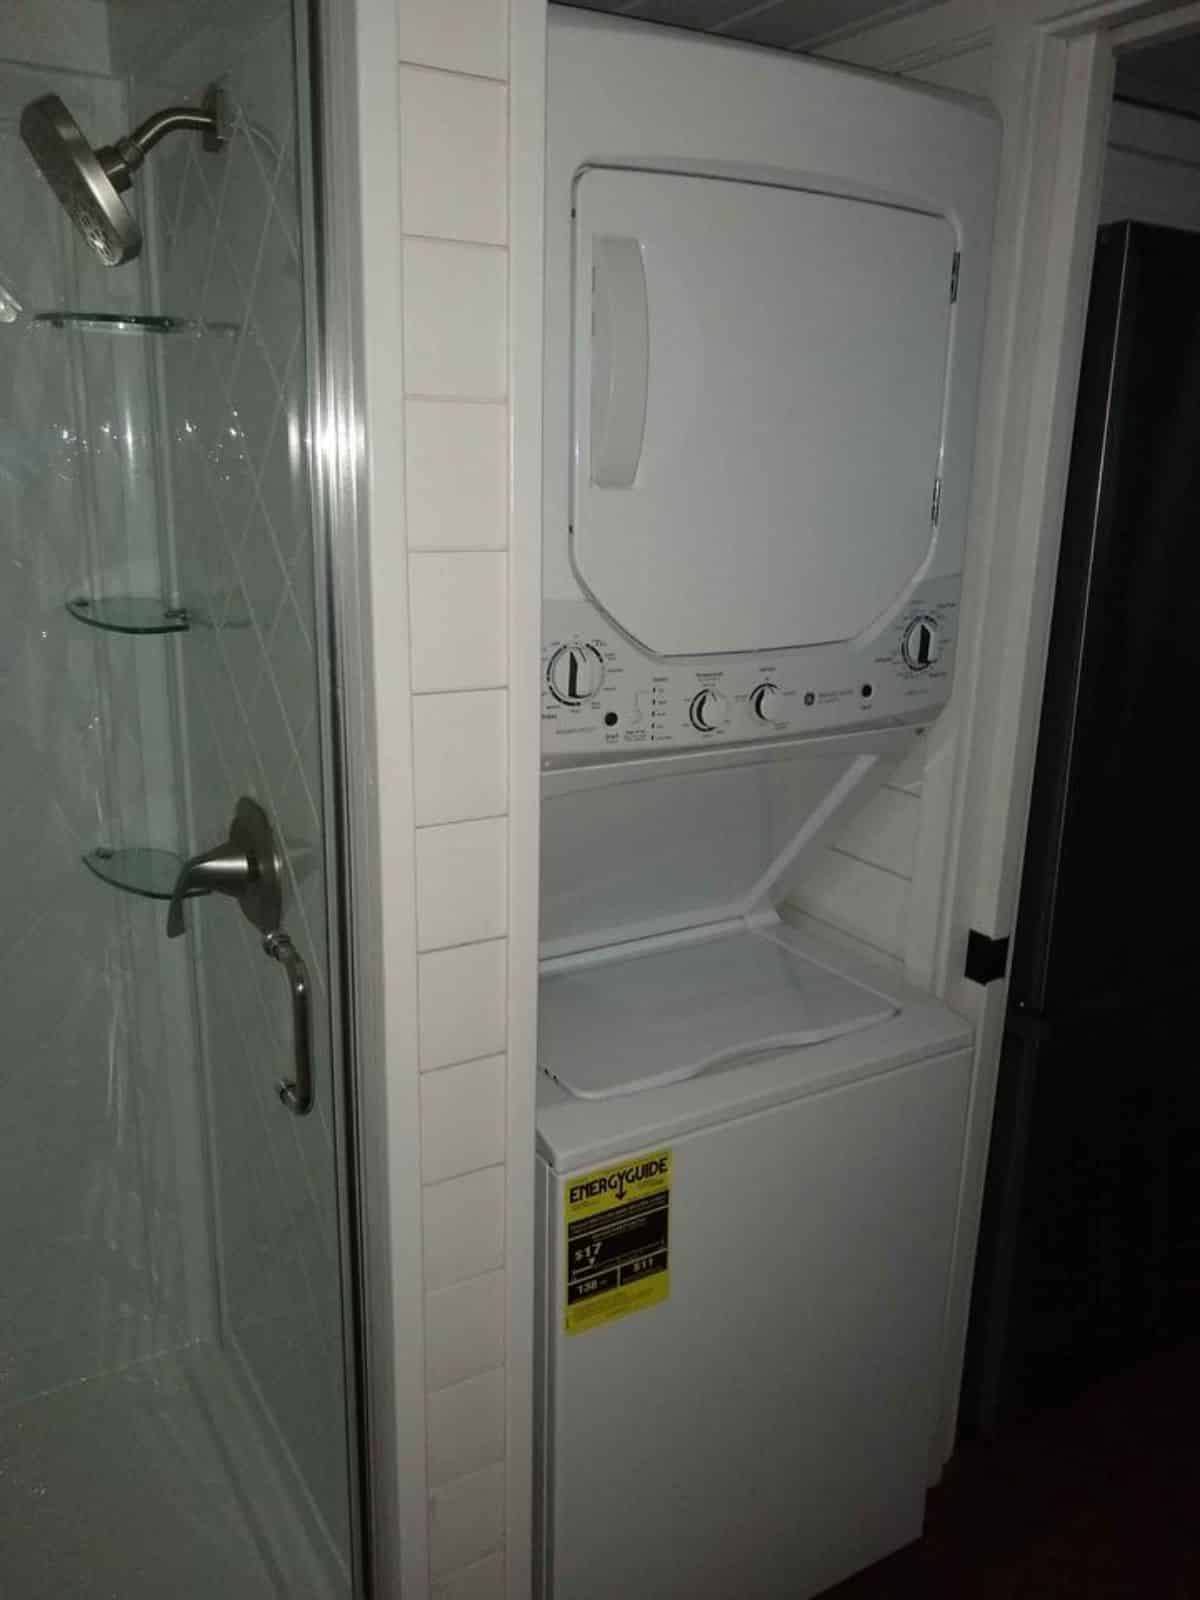 Washer dryer combo is also included in the deal